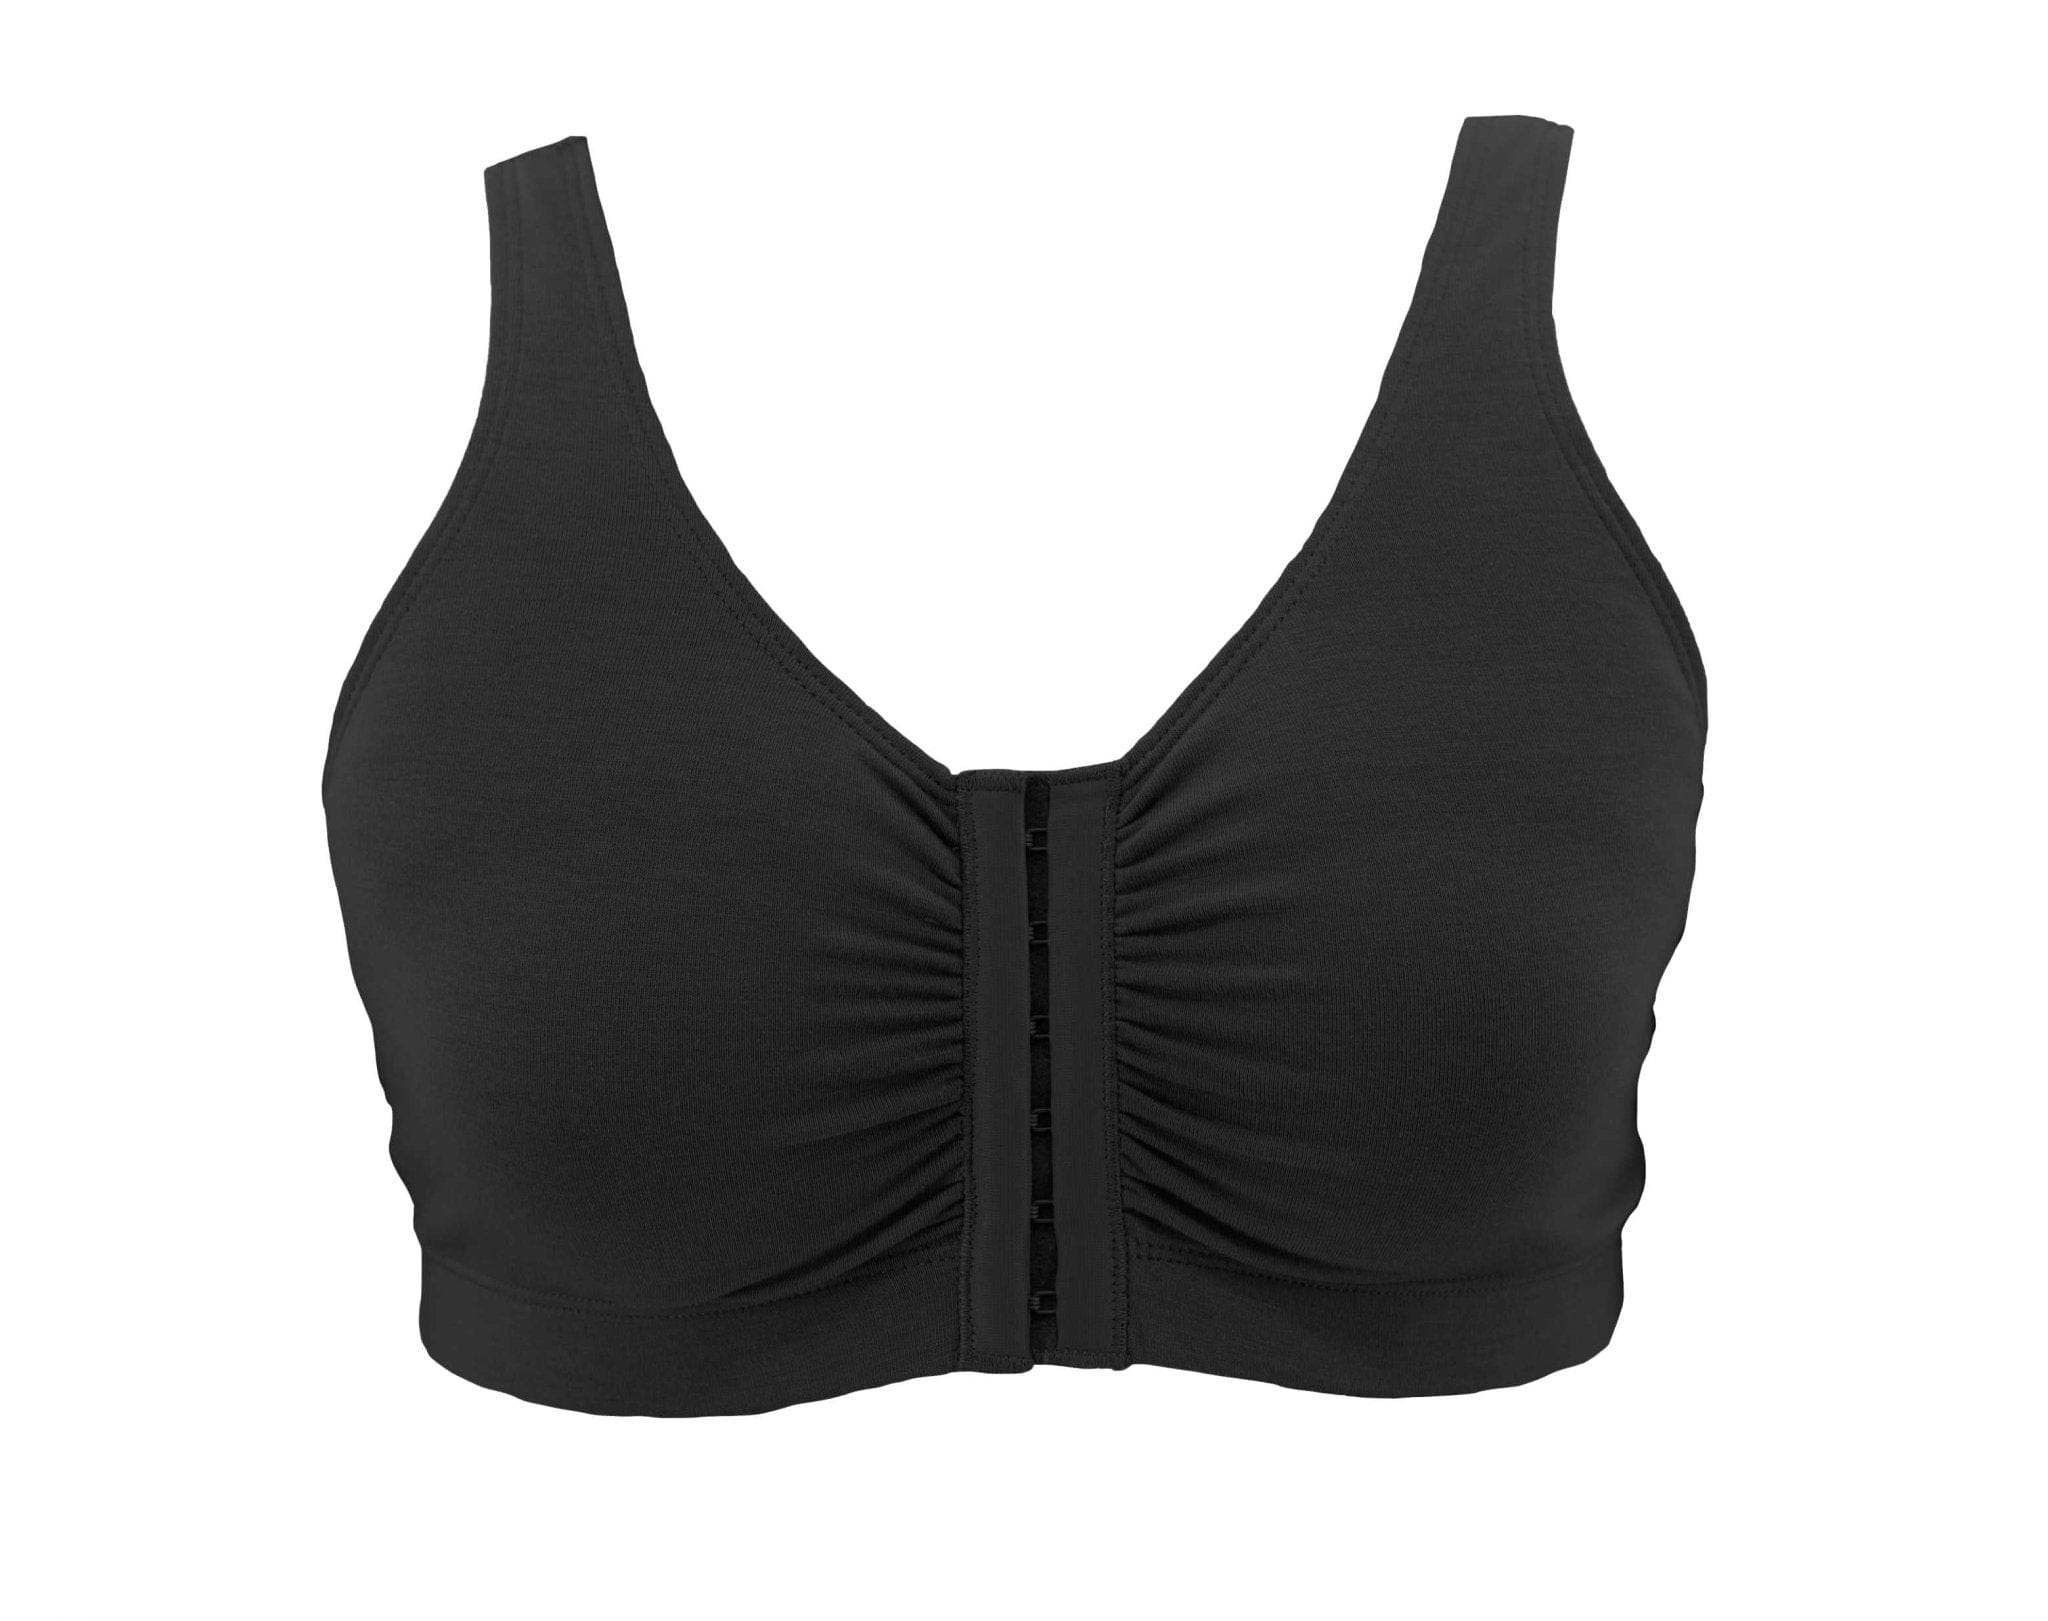 What Bra Should I Wear After My Surgery? - Hall & Wrye – Plastic